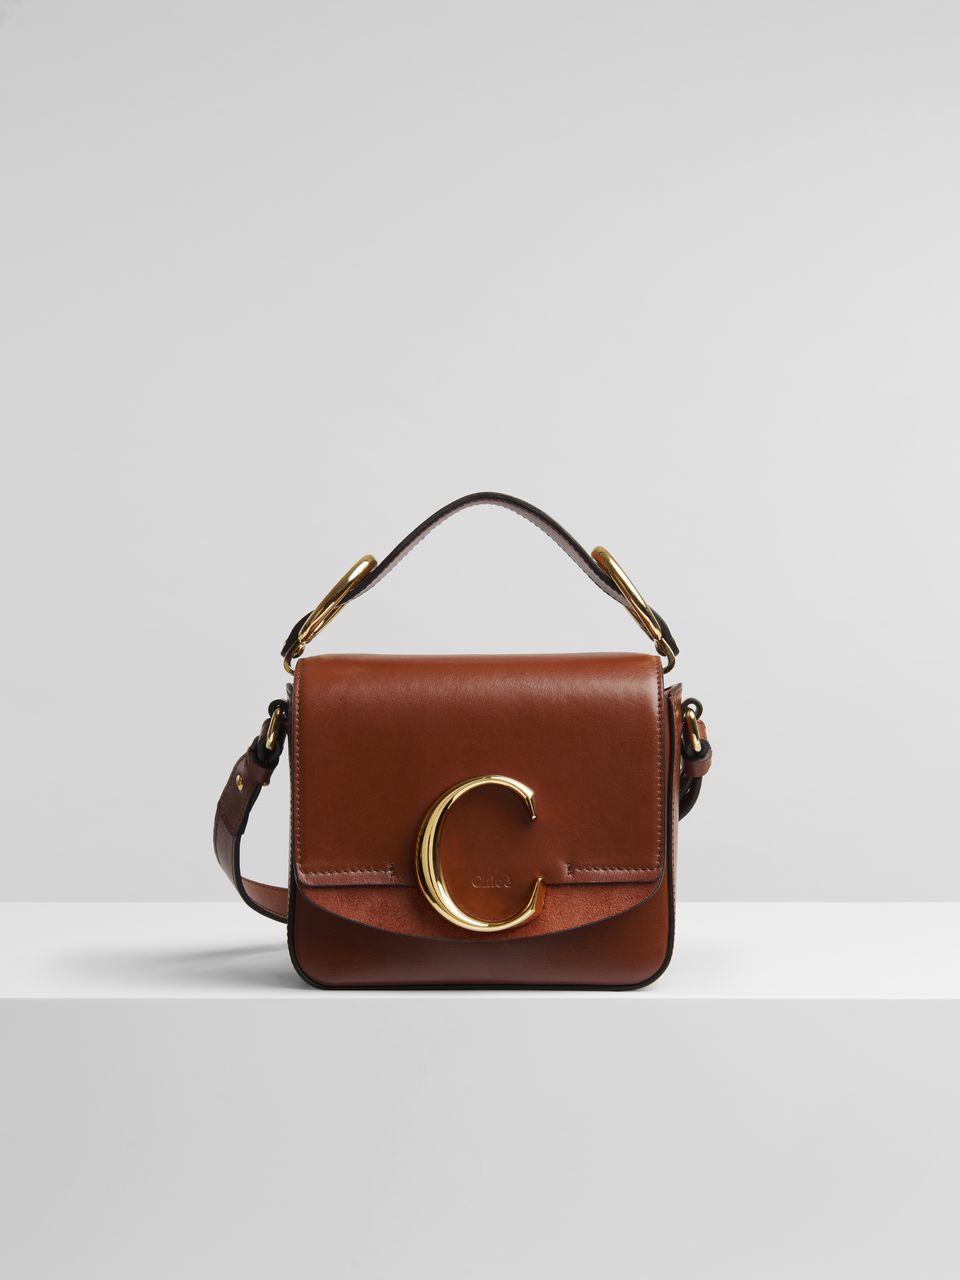 Chloé Celebrates 10 Years of the Marcie Bag With An Anniversary Capsule  Collection - PurseBlog